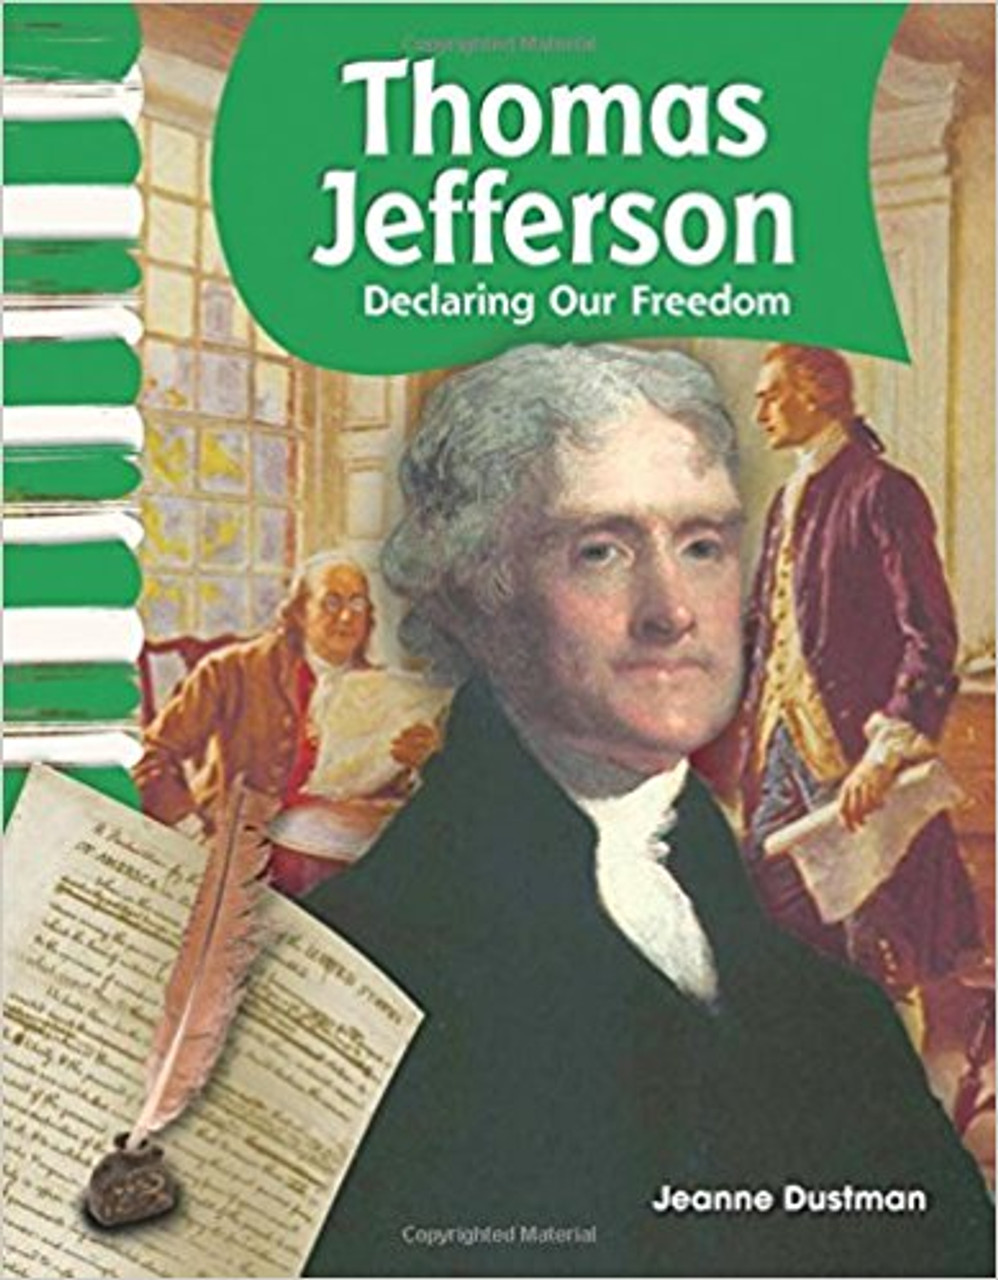 Thomas Jefferson: Declaring Our Freedom by Jeanne Dustman